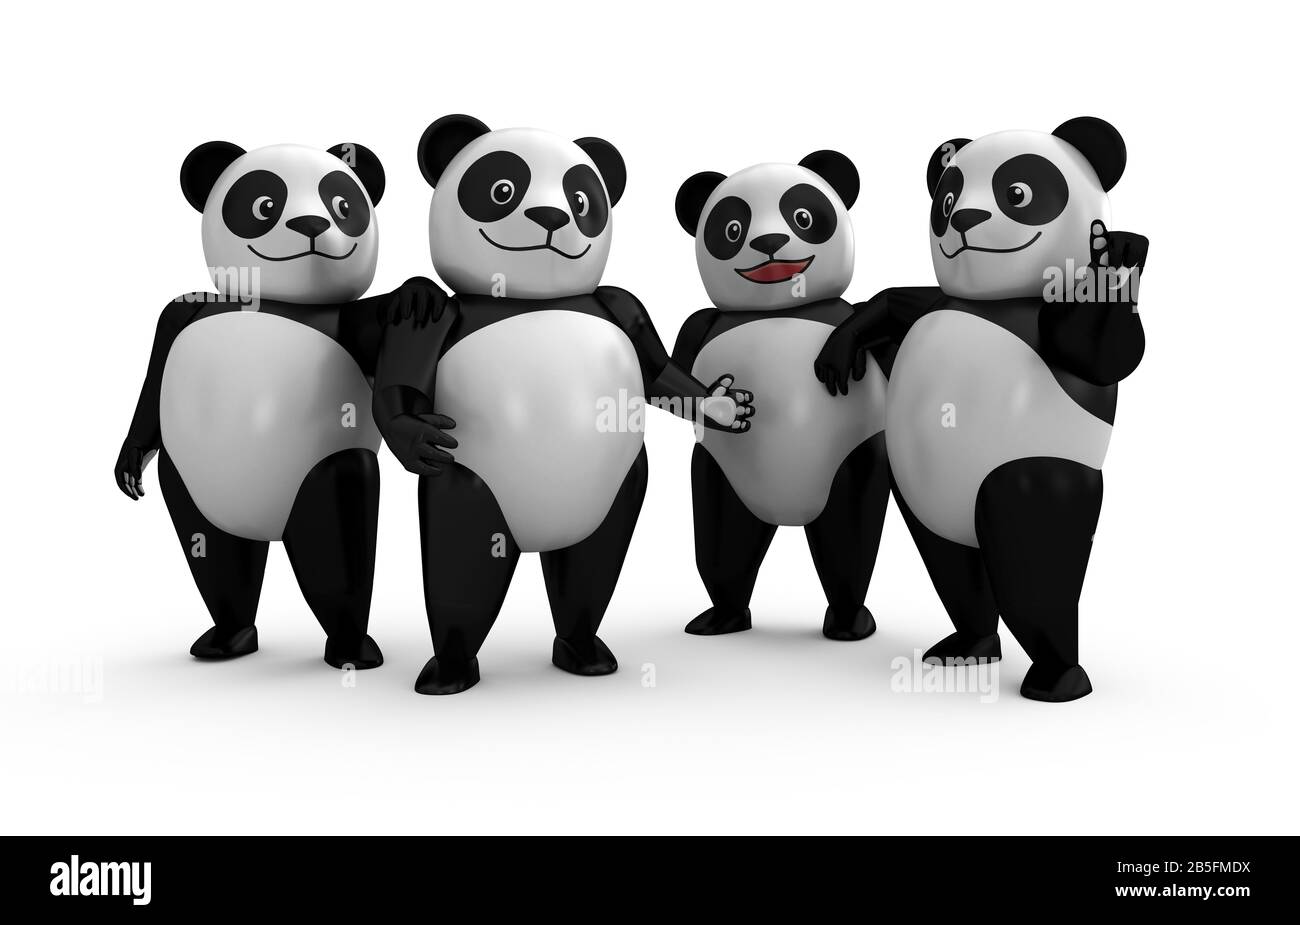 3d Panda Plastic Toy (Toy Art) Style in Multiple Poses (Group). Cartoon 3d Character Design Illustration. Stock Photo